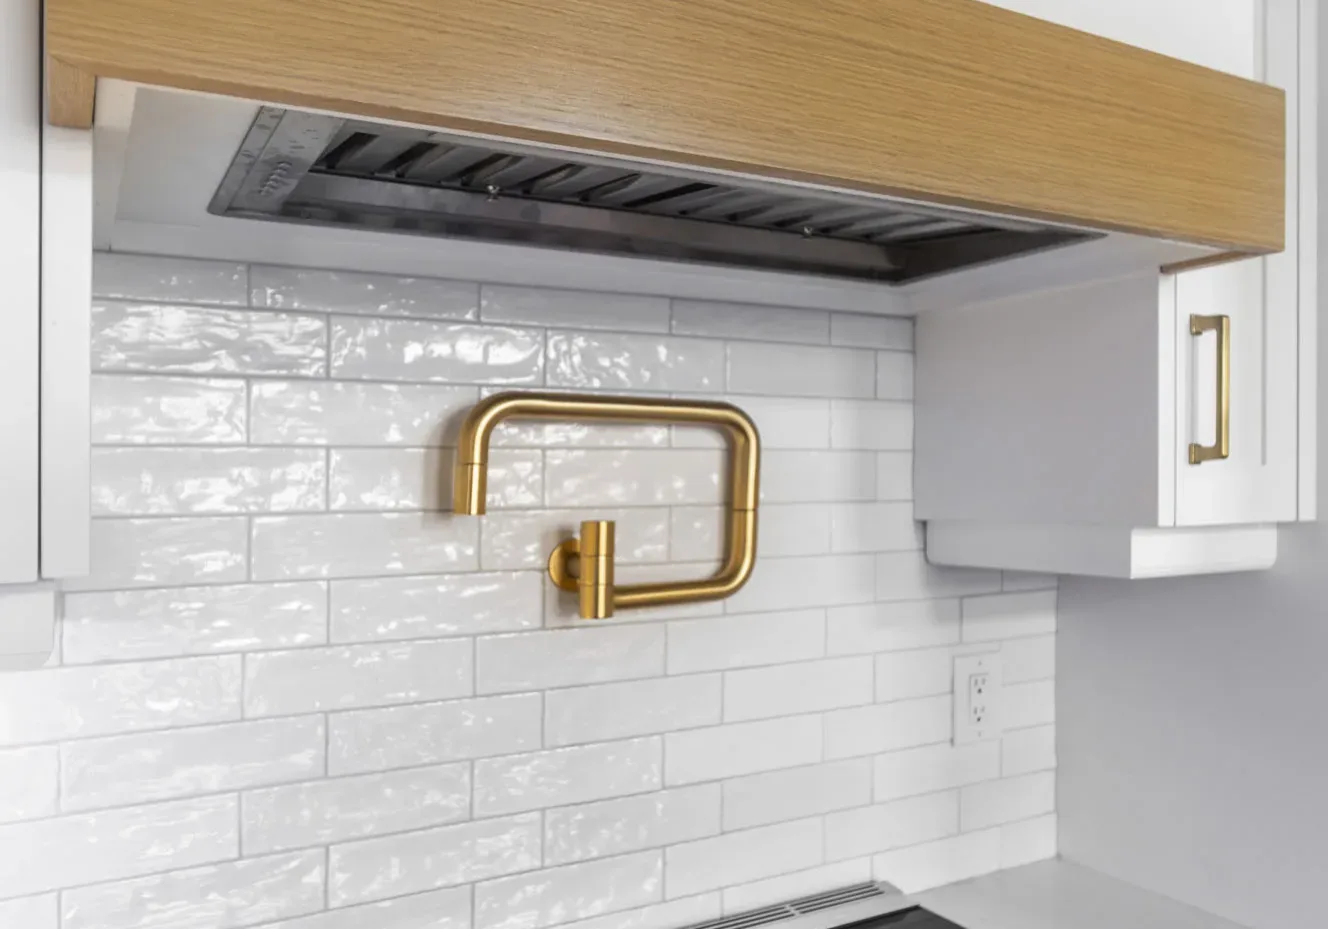 Close up a stove top with white back splash and gold water spout